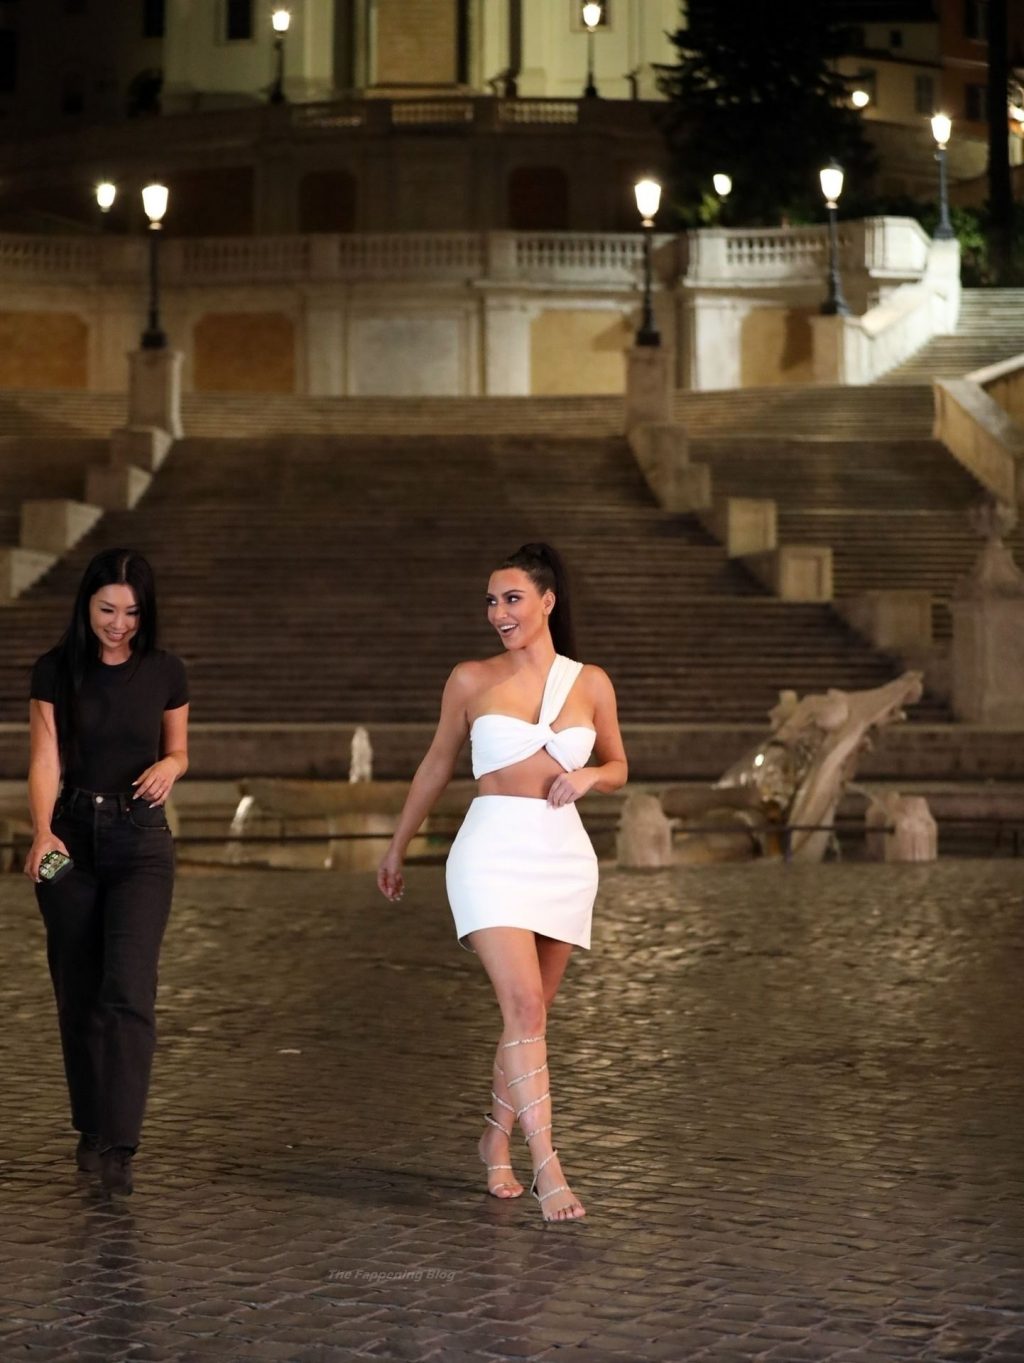 Kim Kardashian Stops By the Famous Spanish Steps to Take Pics in Rome (25 Photos)